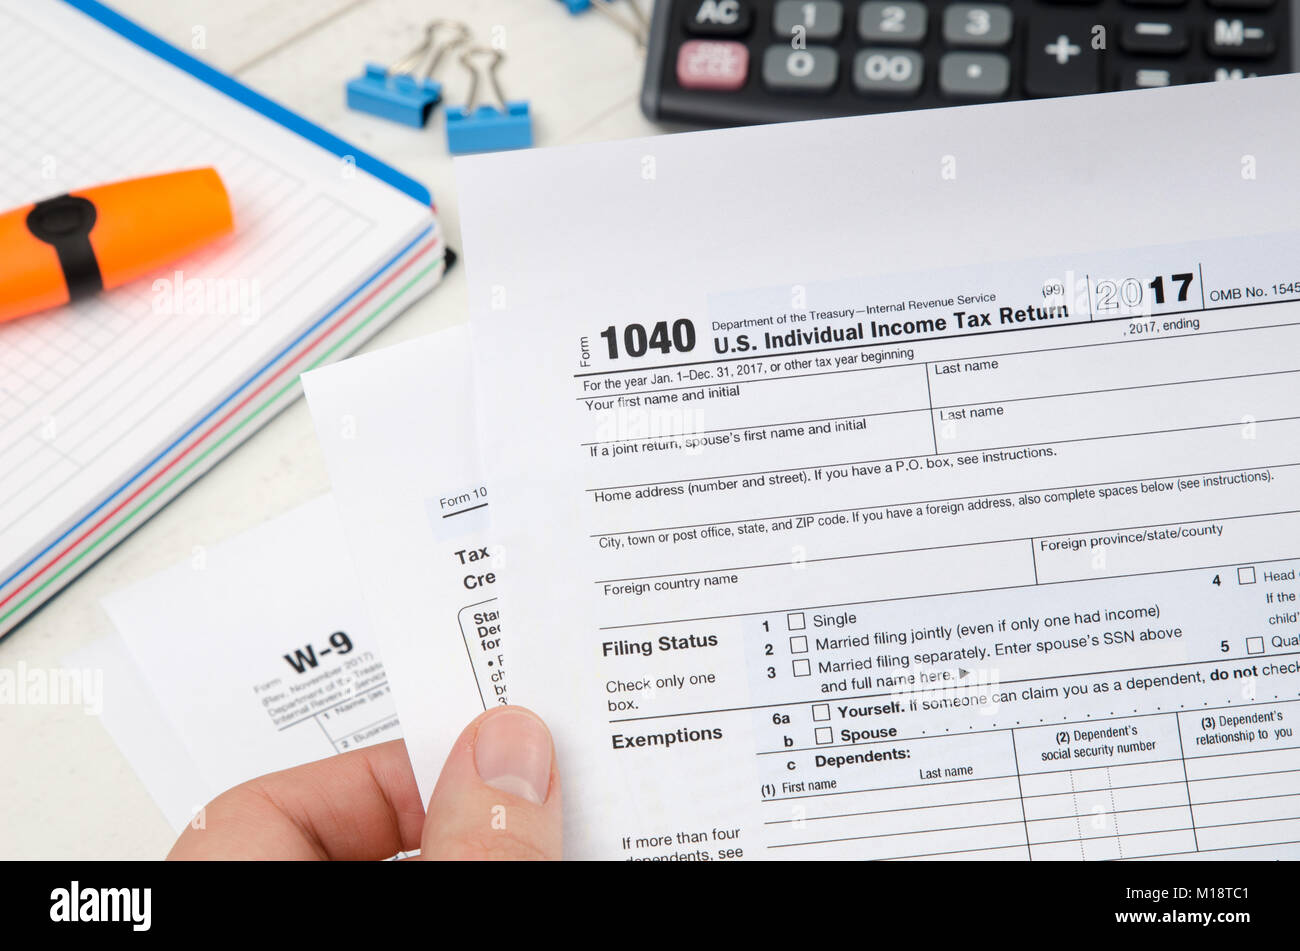 Man holding US tax form 1040. Tax form law document irs business concept Stock Photo